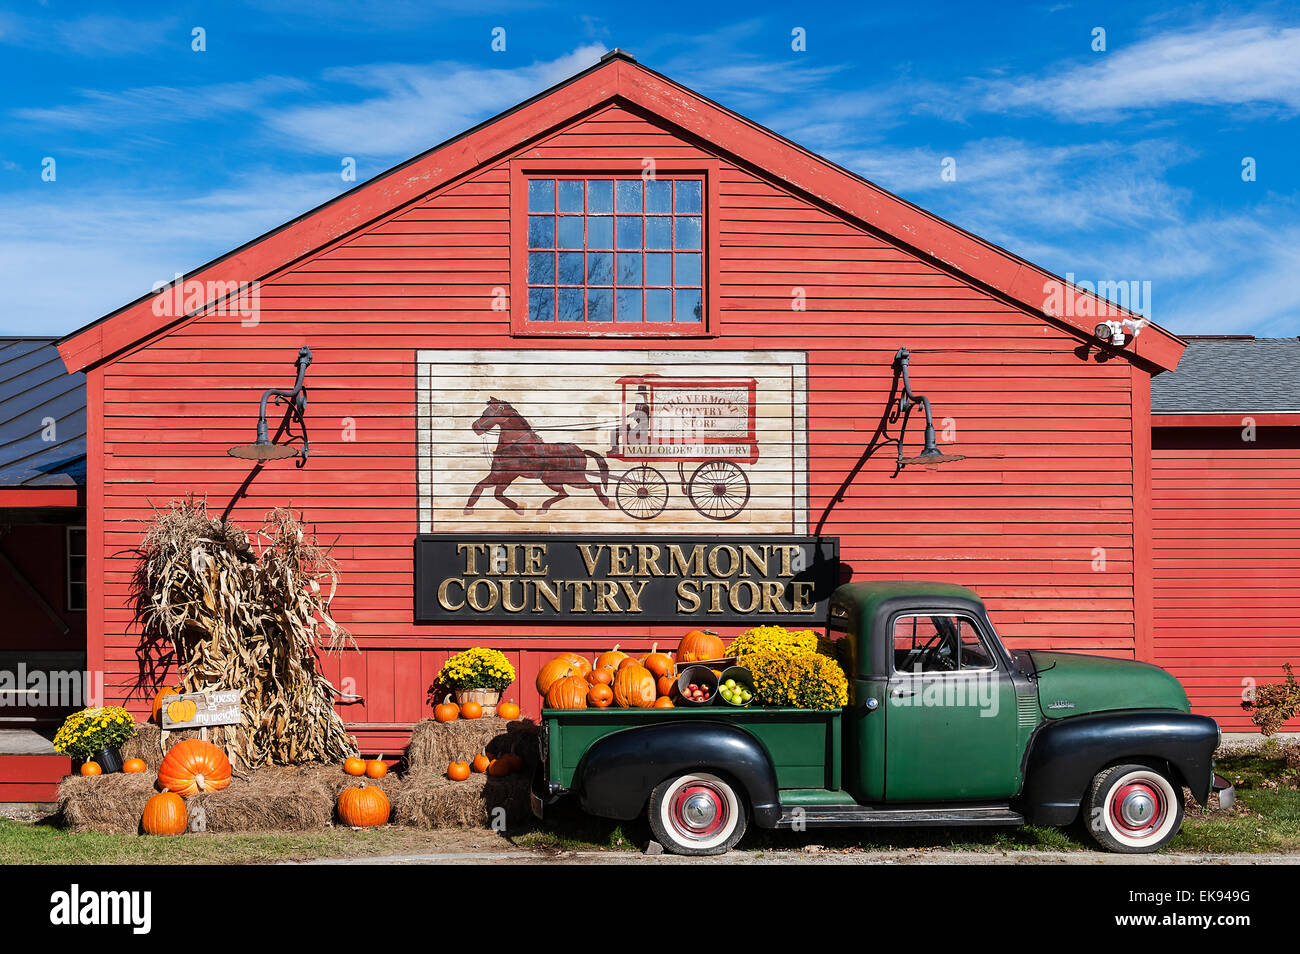 The Vermont Country Store (@vermontcountrystore) • Instagram photos and  videos